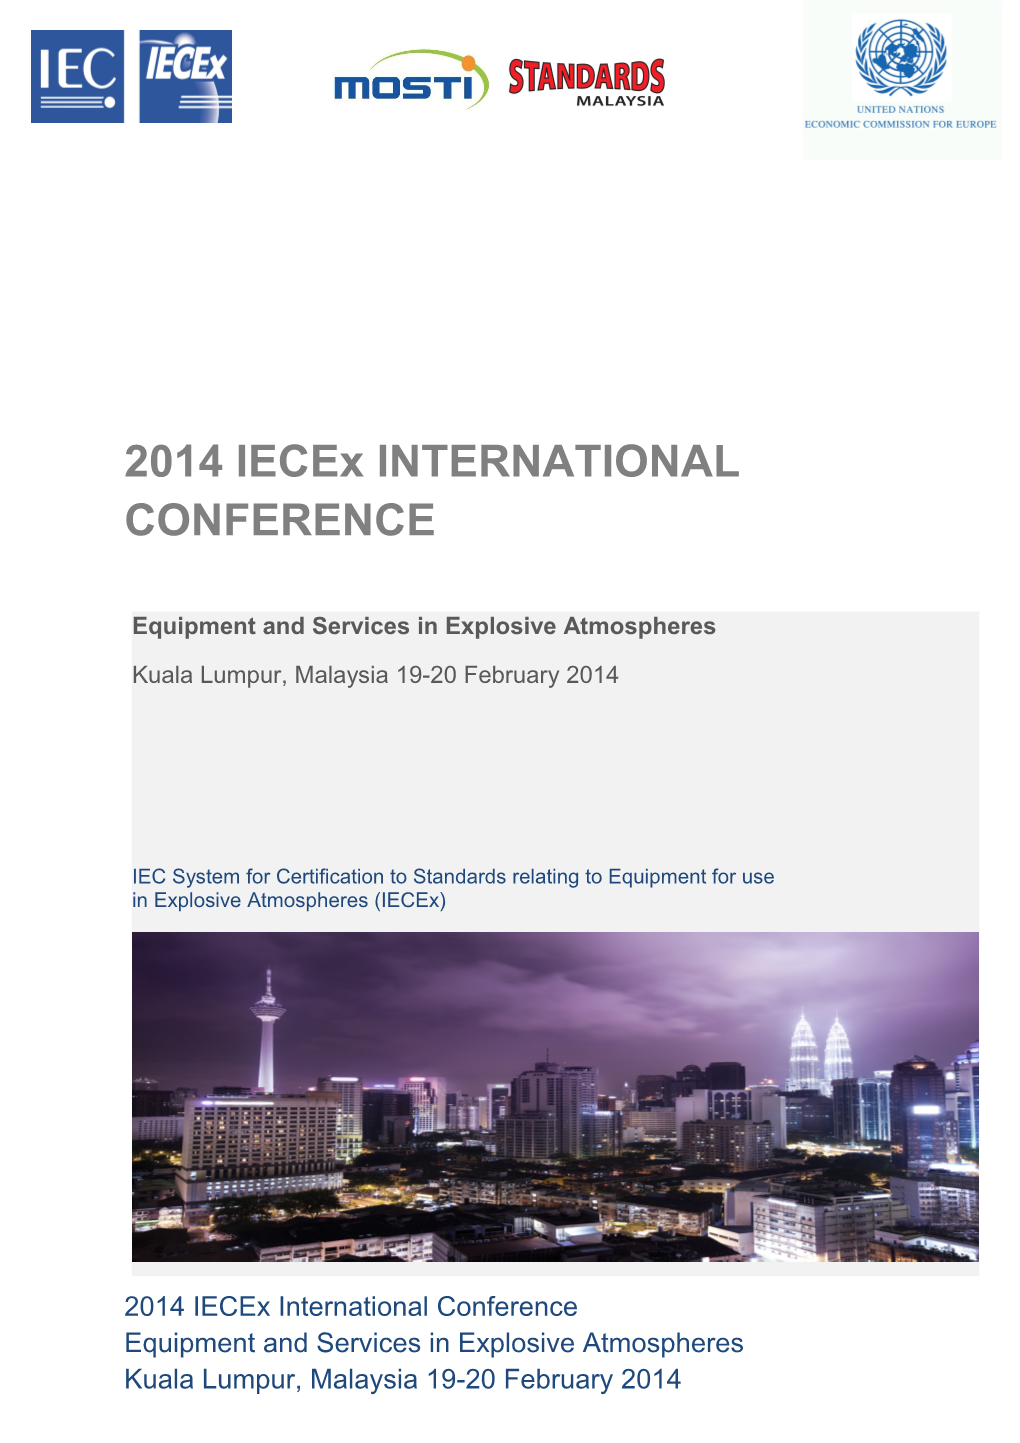 2014 Iecex INTERNATIONAL CONFERENCE